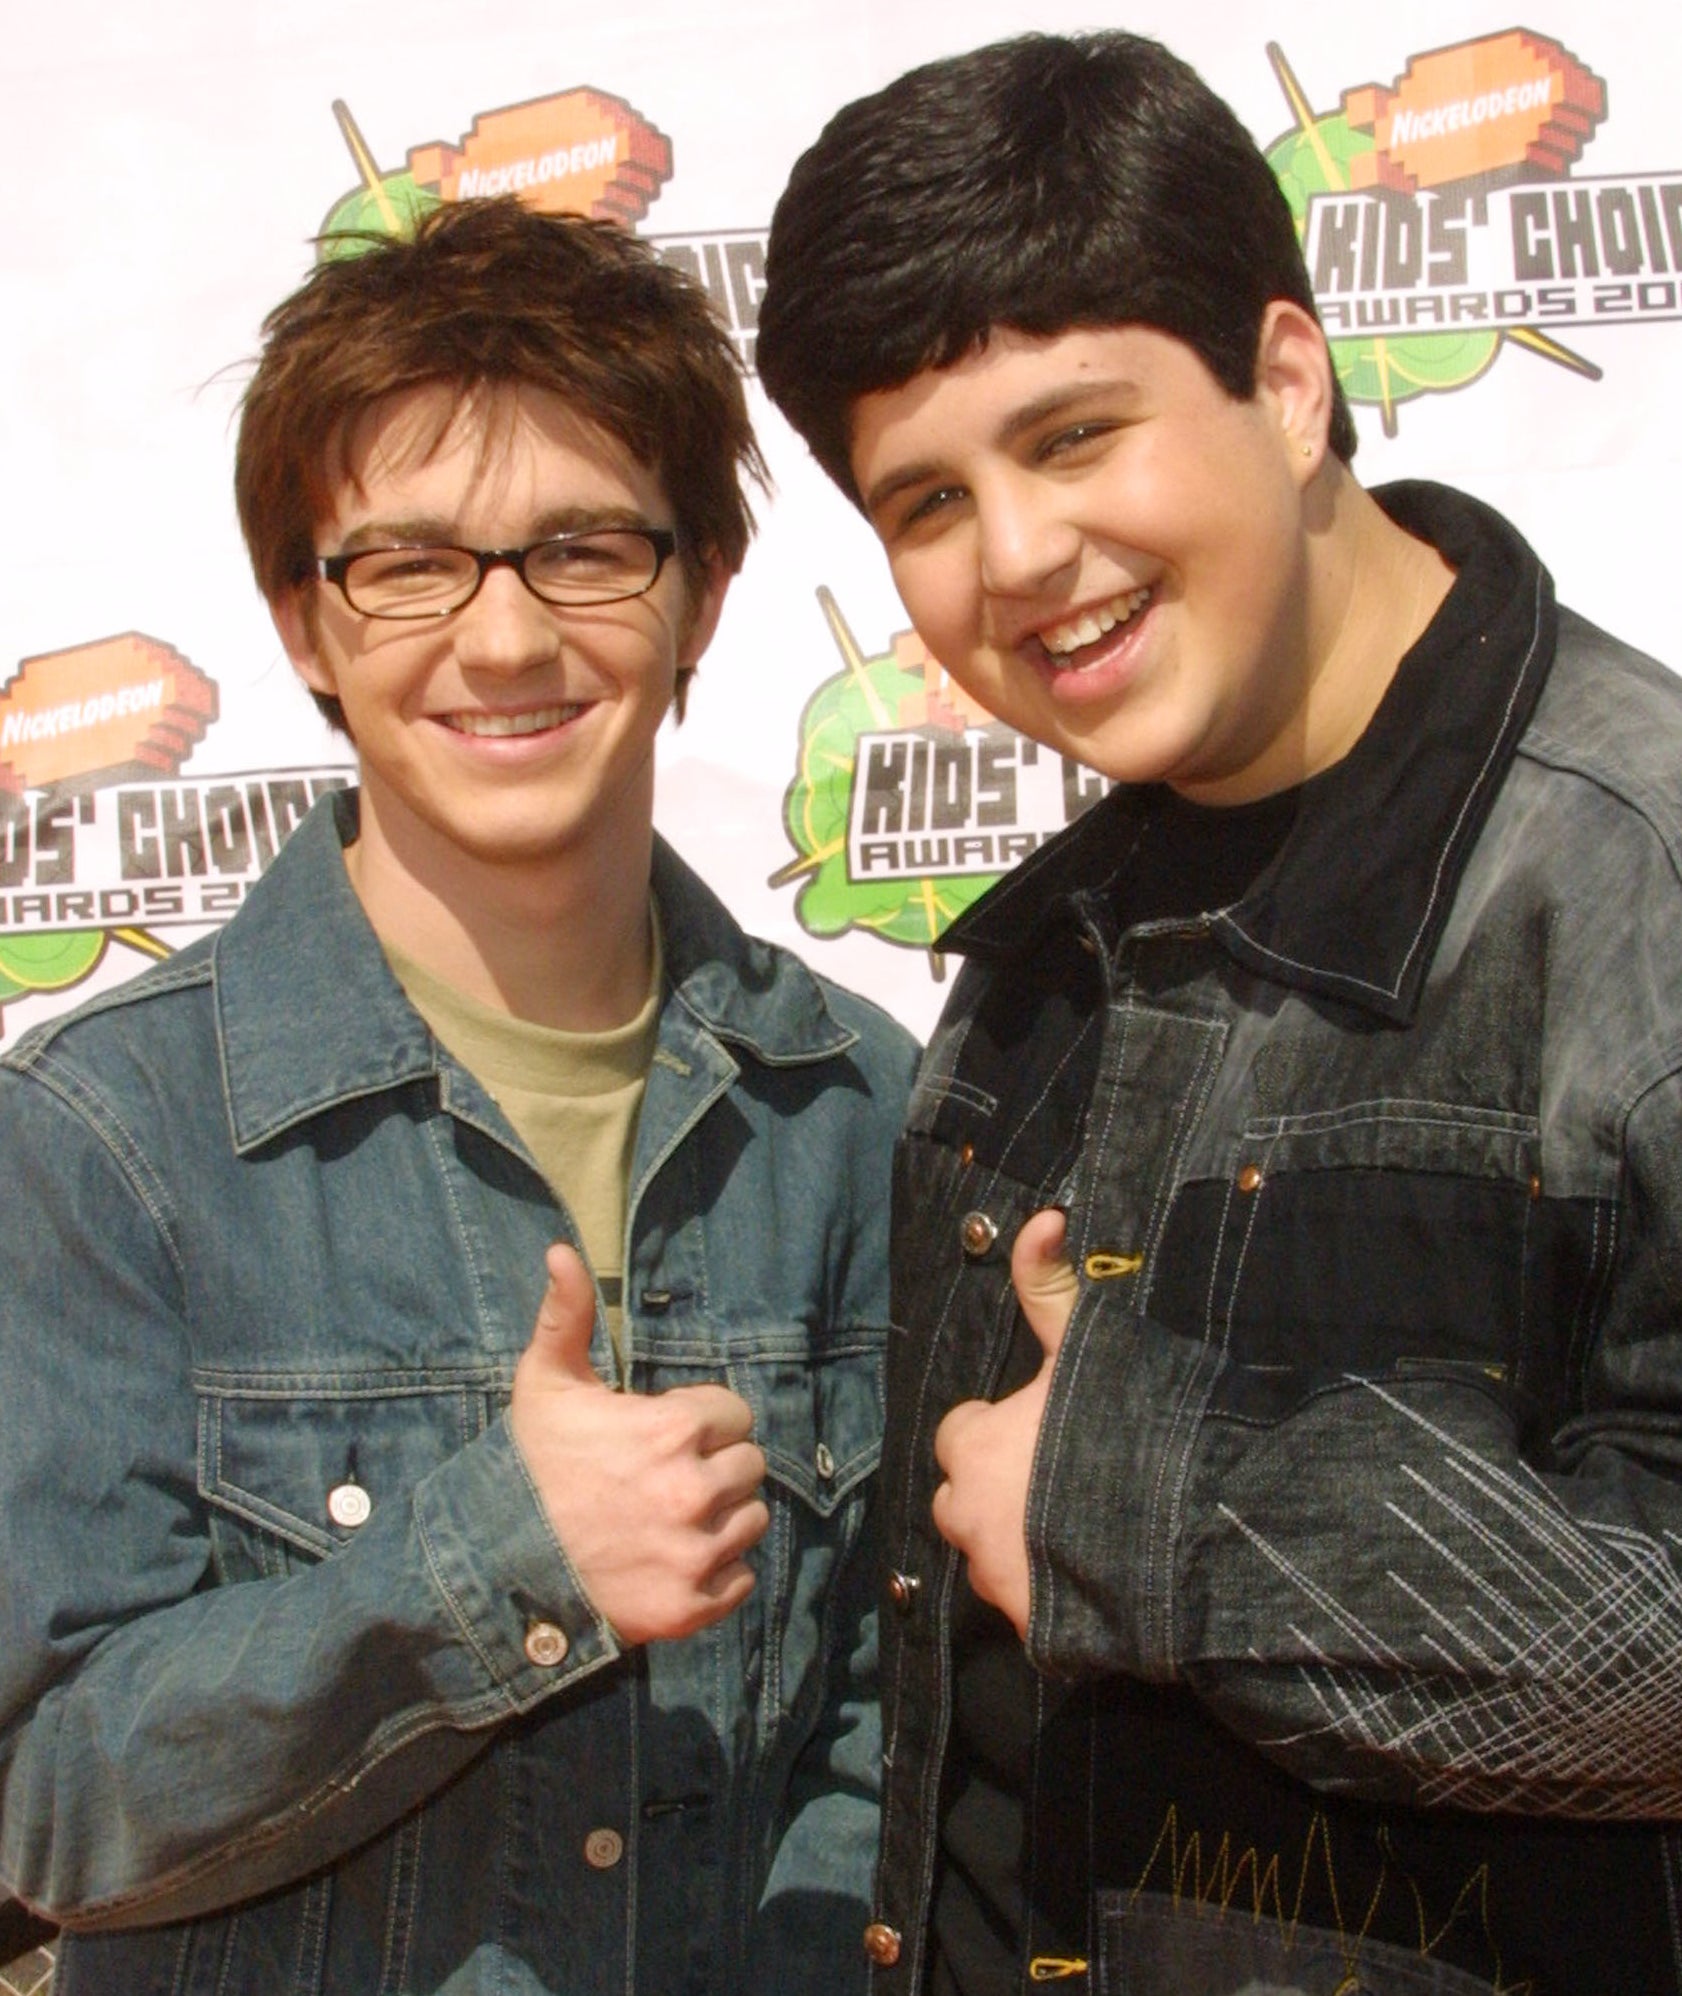 Drake Bell and Josh Peck giving a thumbs up while posing for photographers at an event